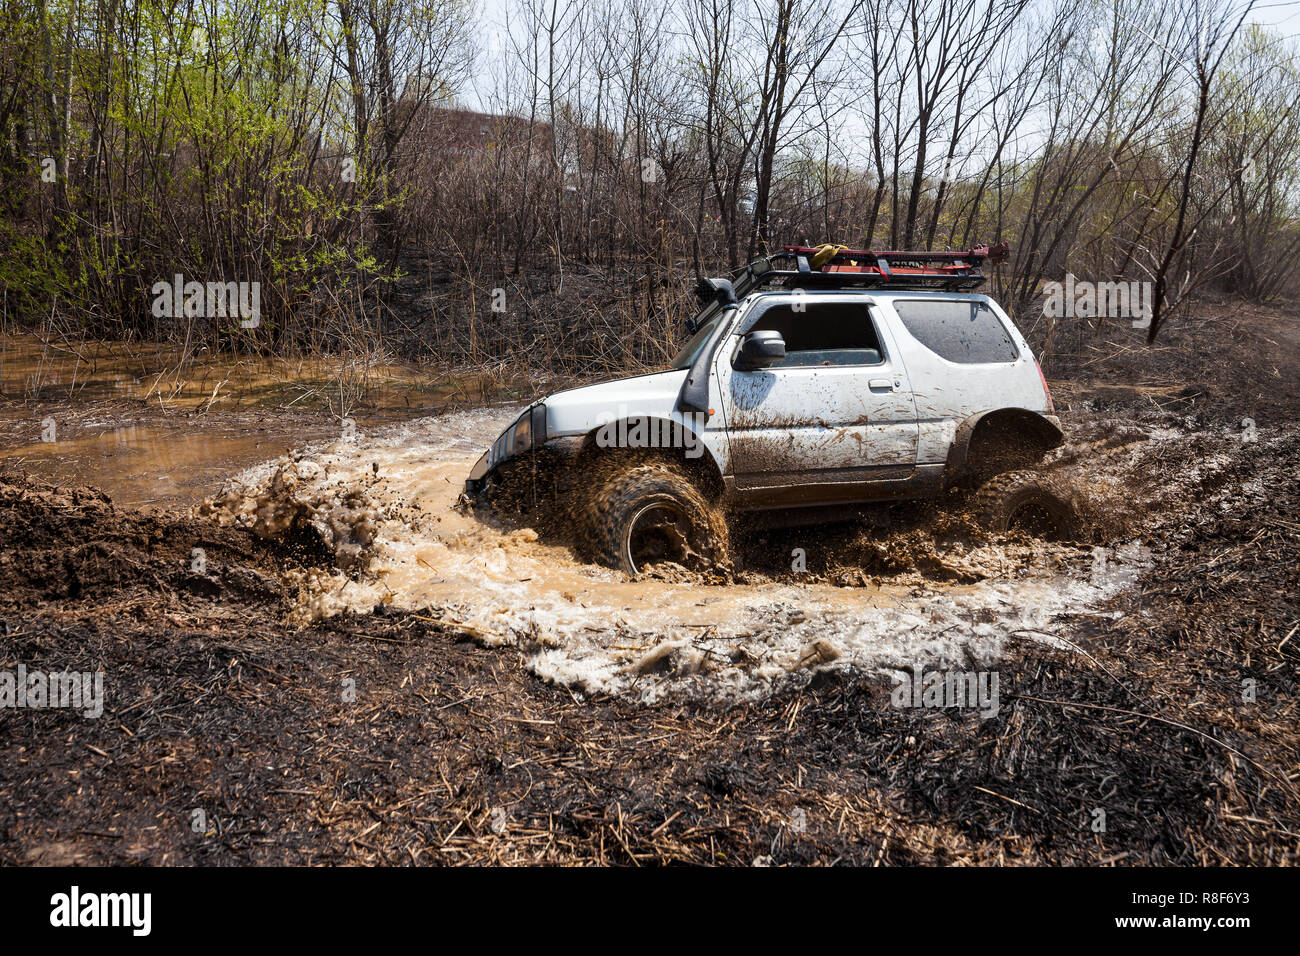 Suzuki Jimny crossing water obstacle or a swamp Stock Photo